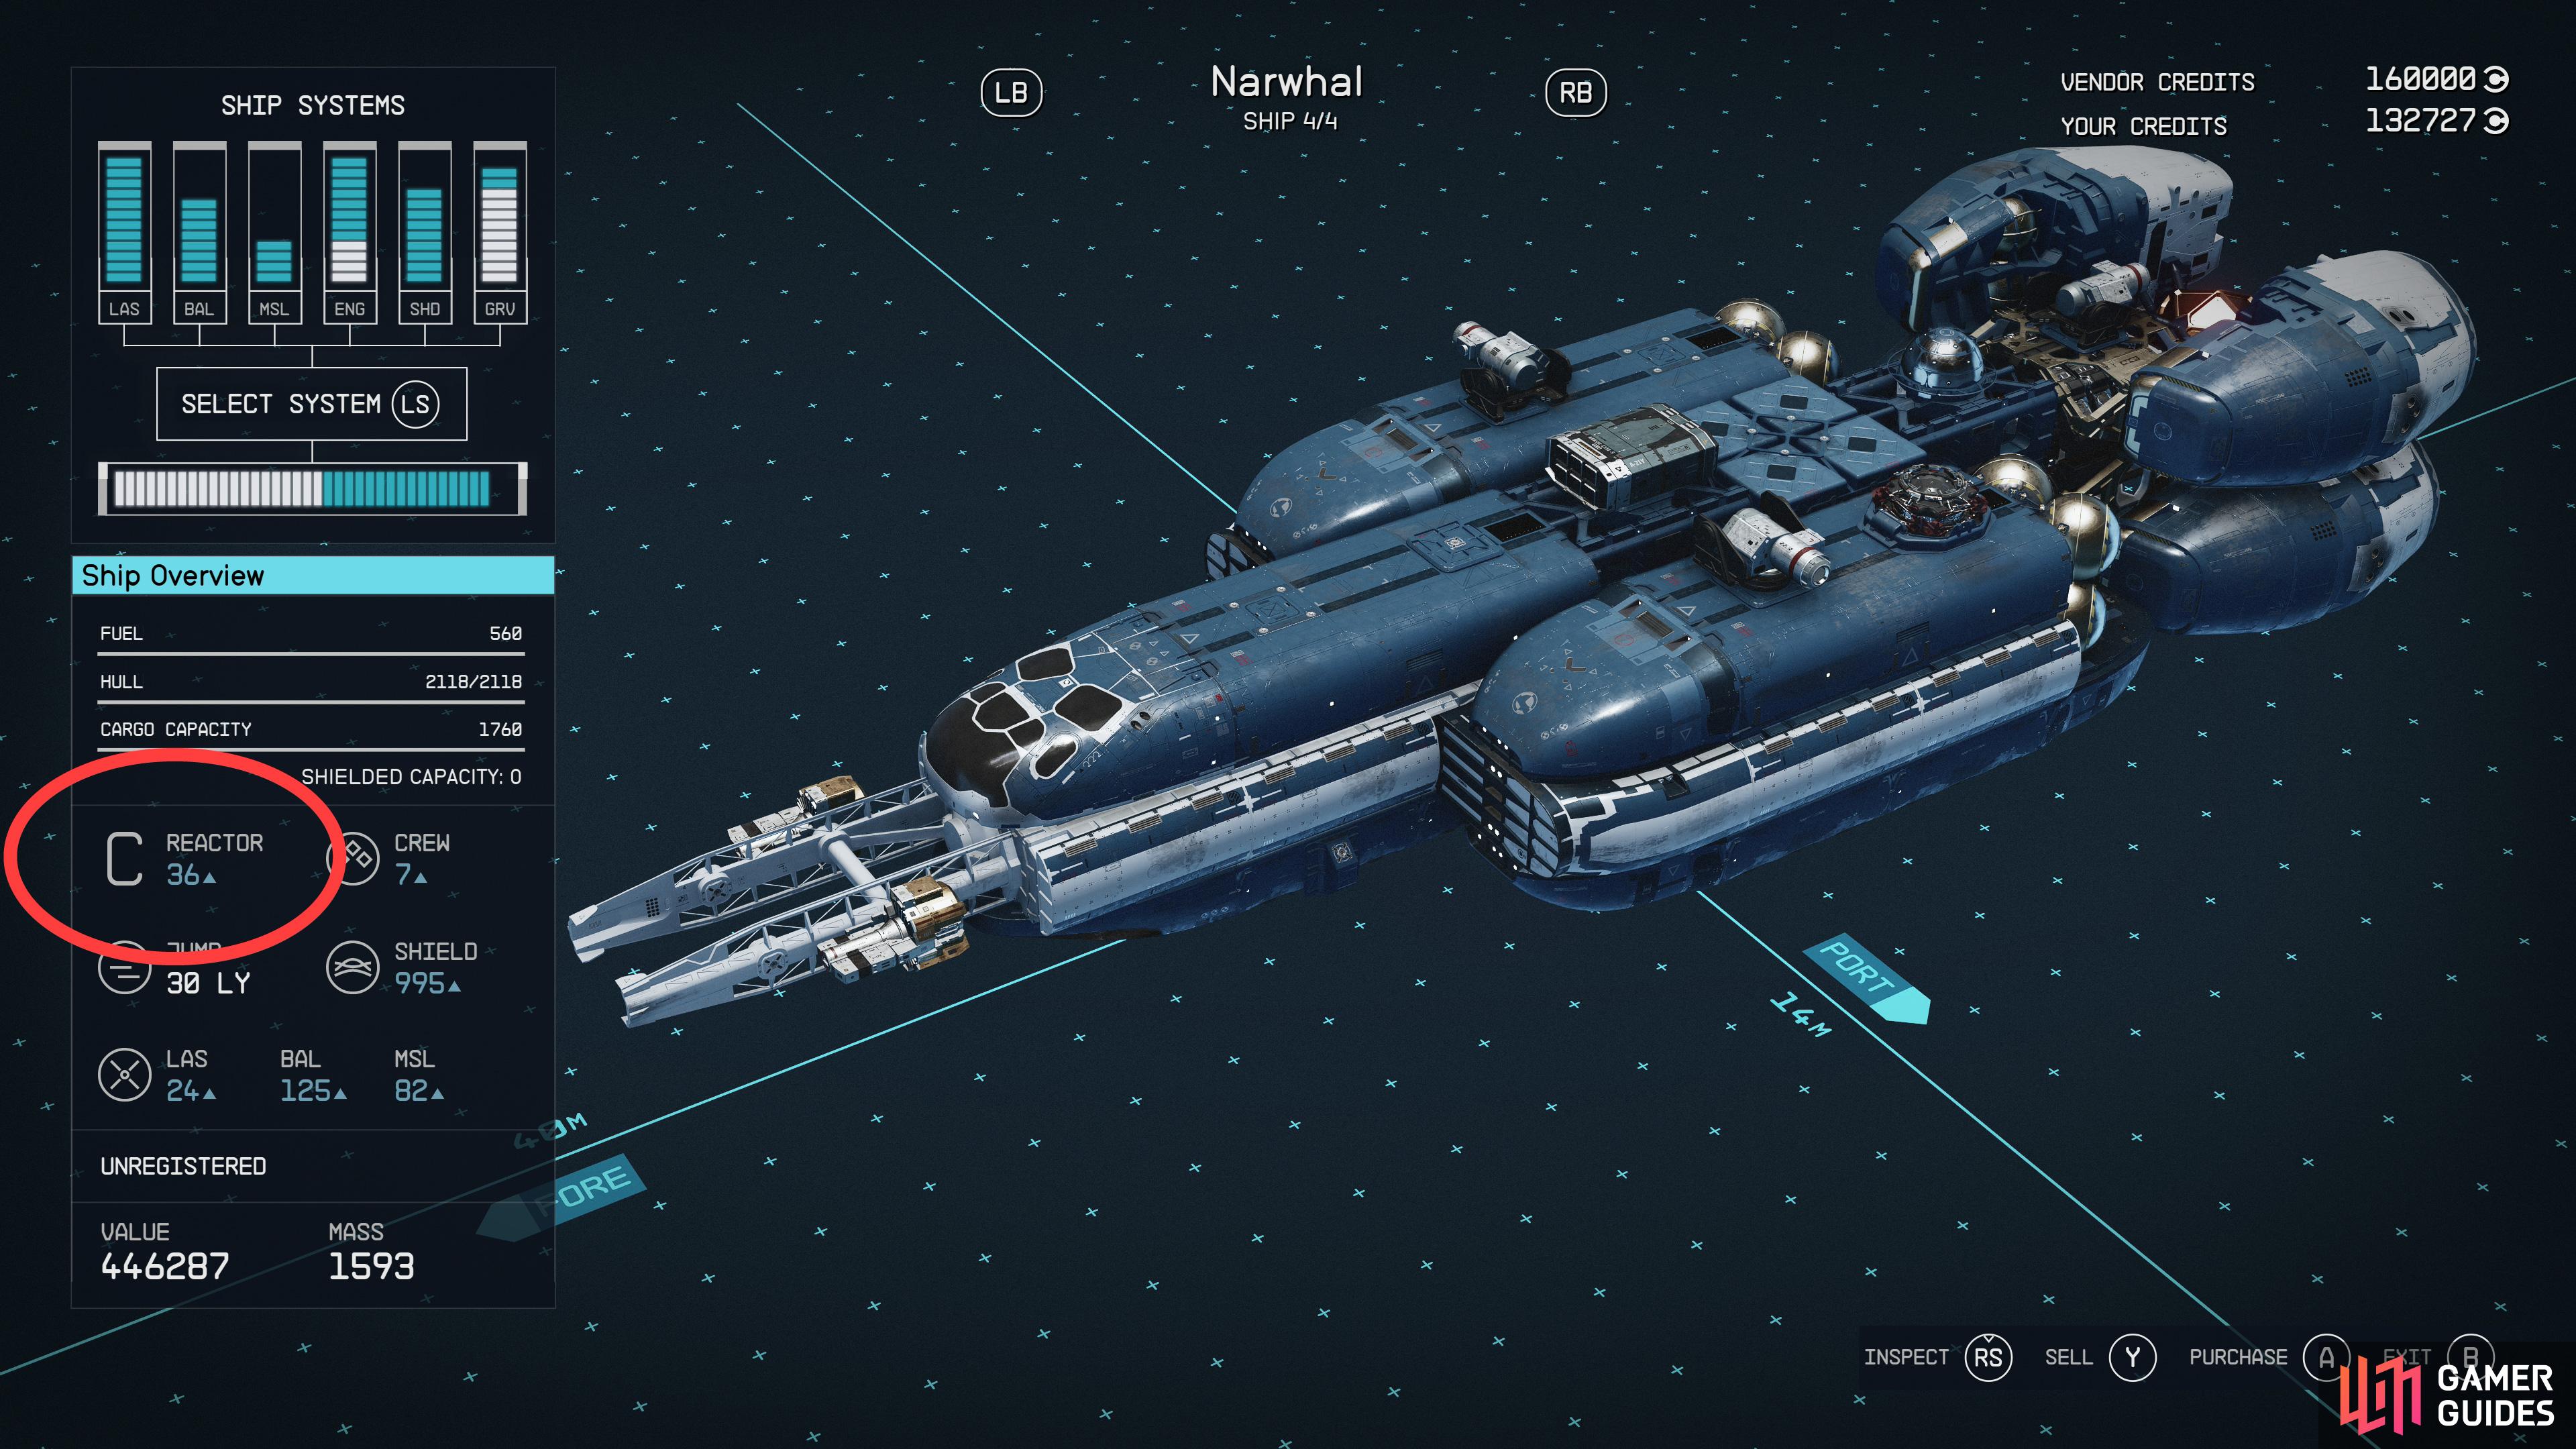 A Class C ship in Starfield is just any vessel with a Class C reactor installed. Early on you can only find such ships for sale as prebuilts (the pictured Narwhal being an example) - Class C reactors don't show up for individual sale until later.